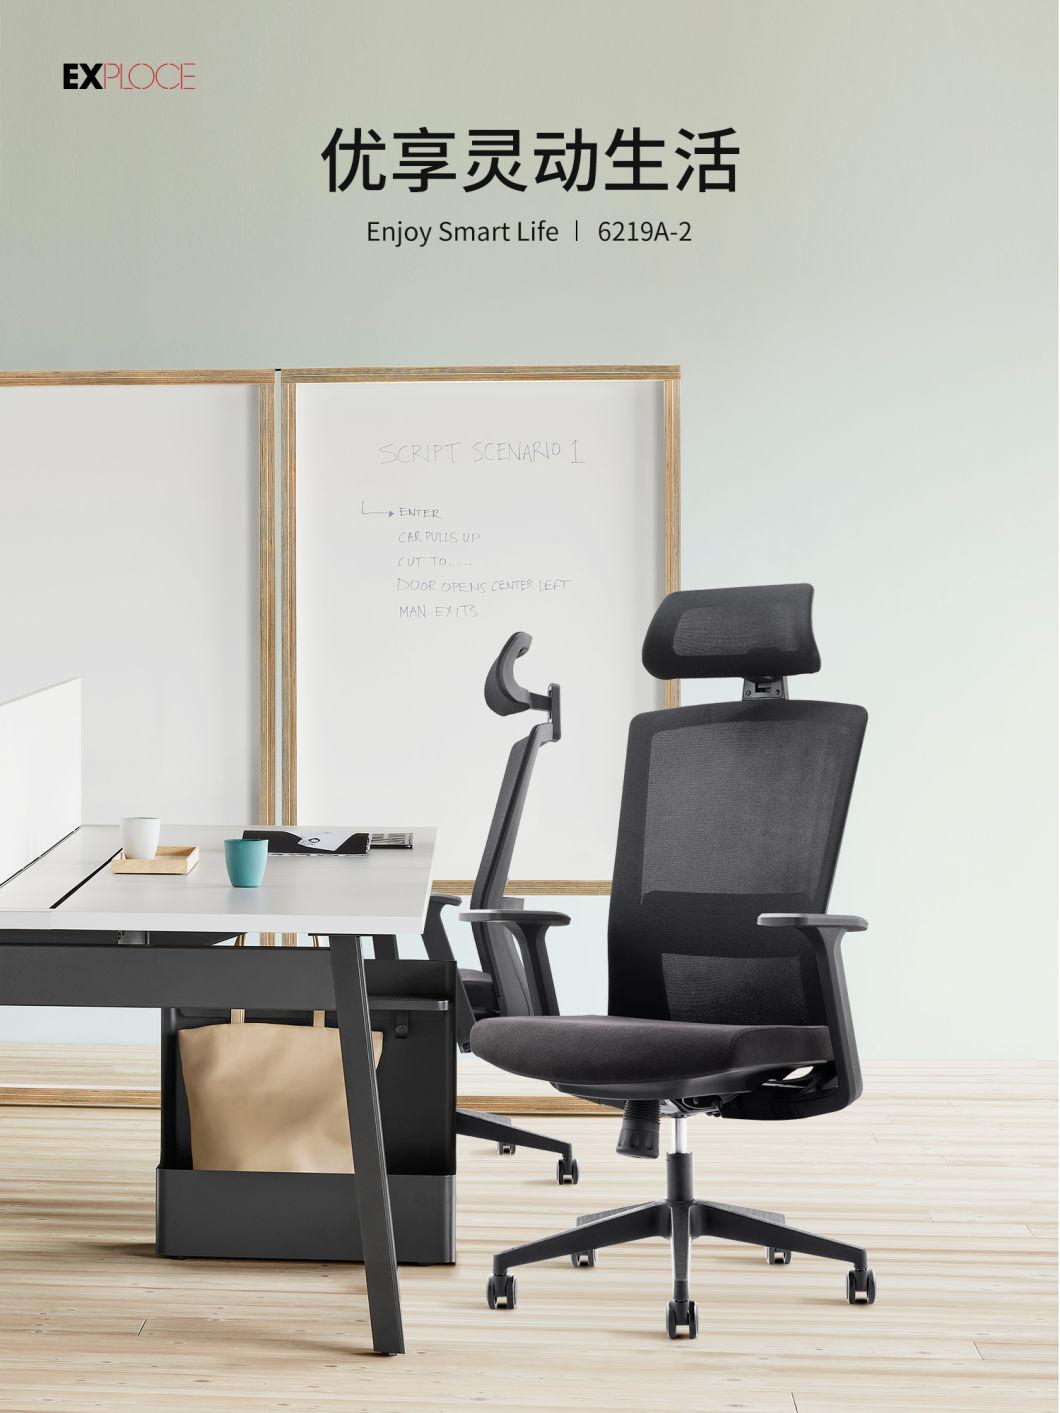 Low Price BIFMA Foshan Seating Gaming Chairs Folding Computer Parts Chair Office Furniture